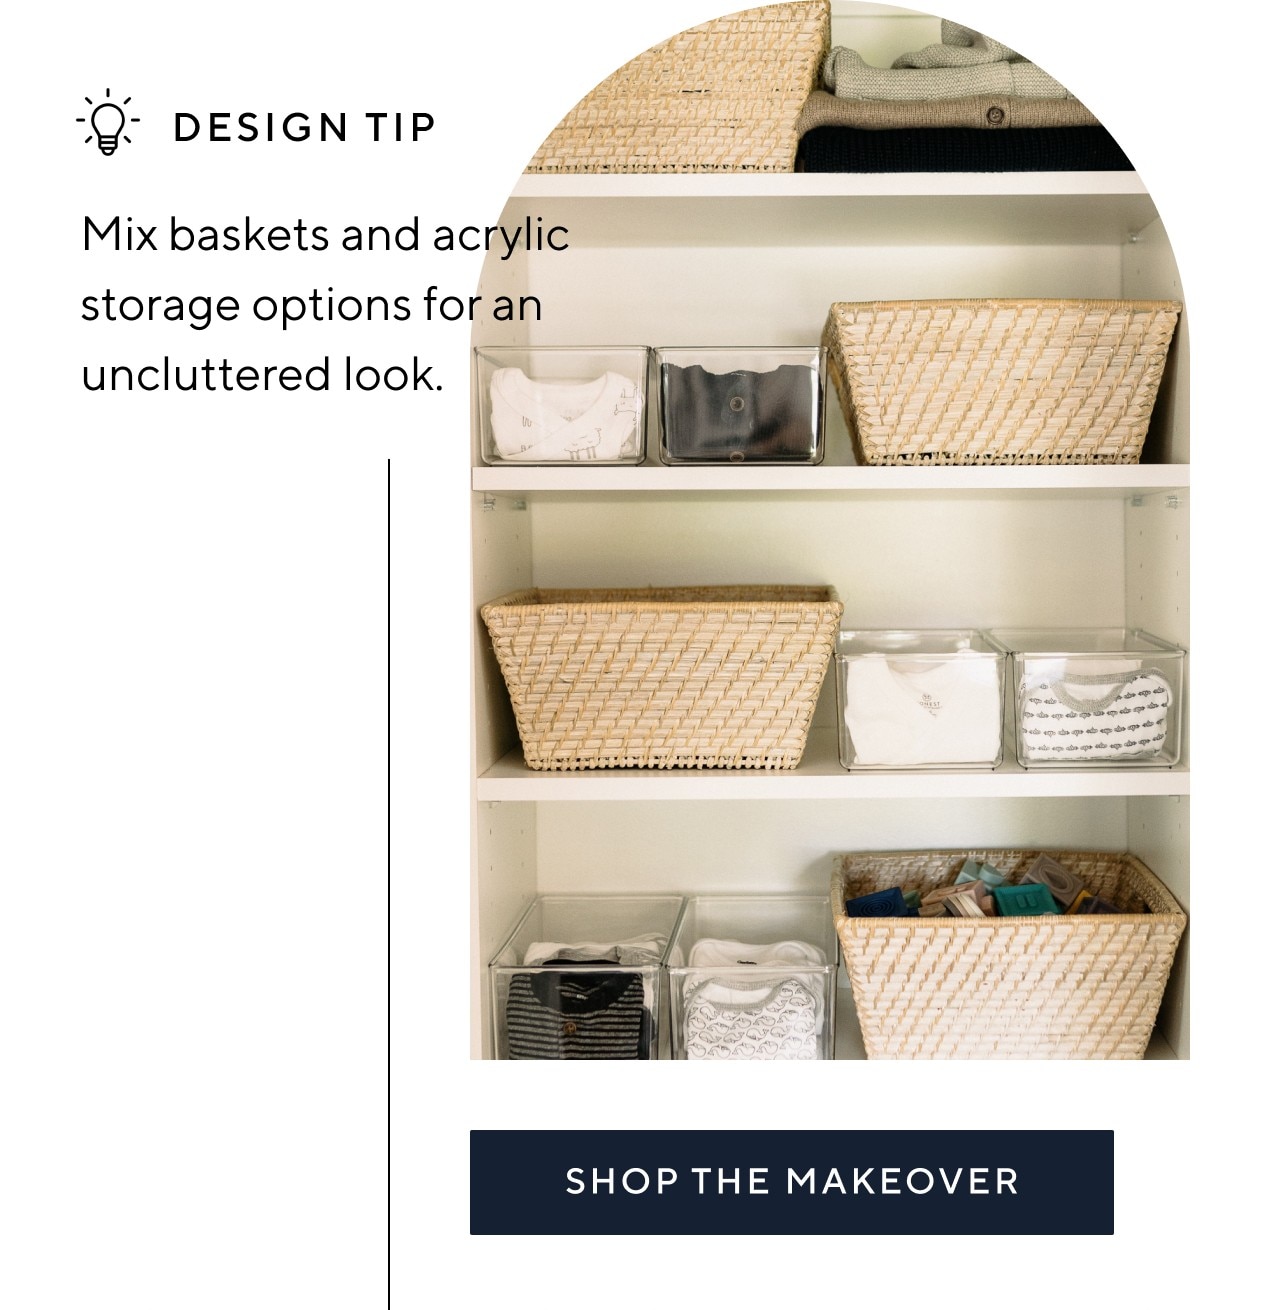 SHOP THE MAKEOVER